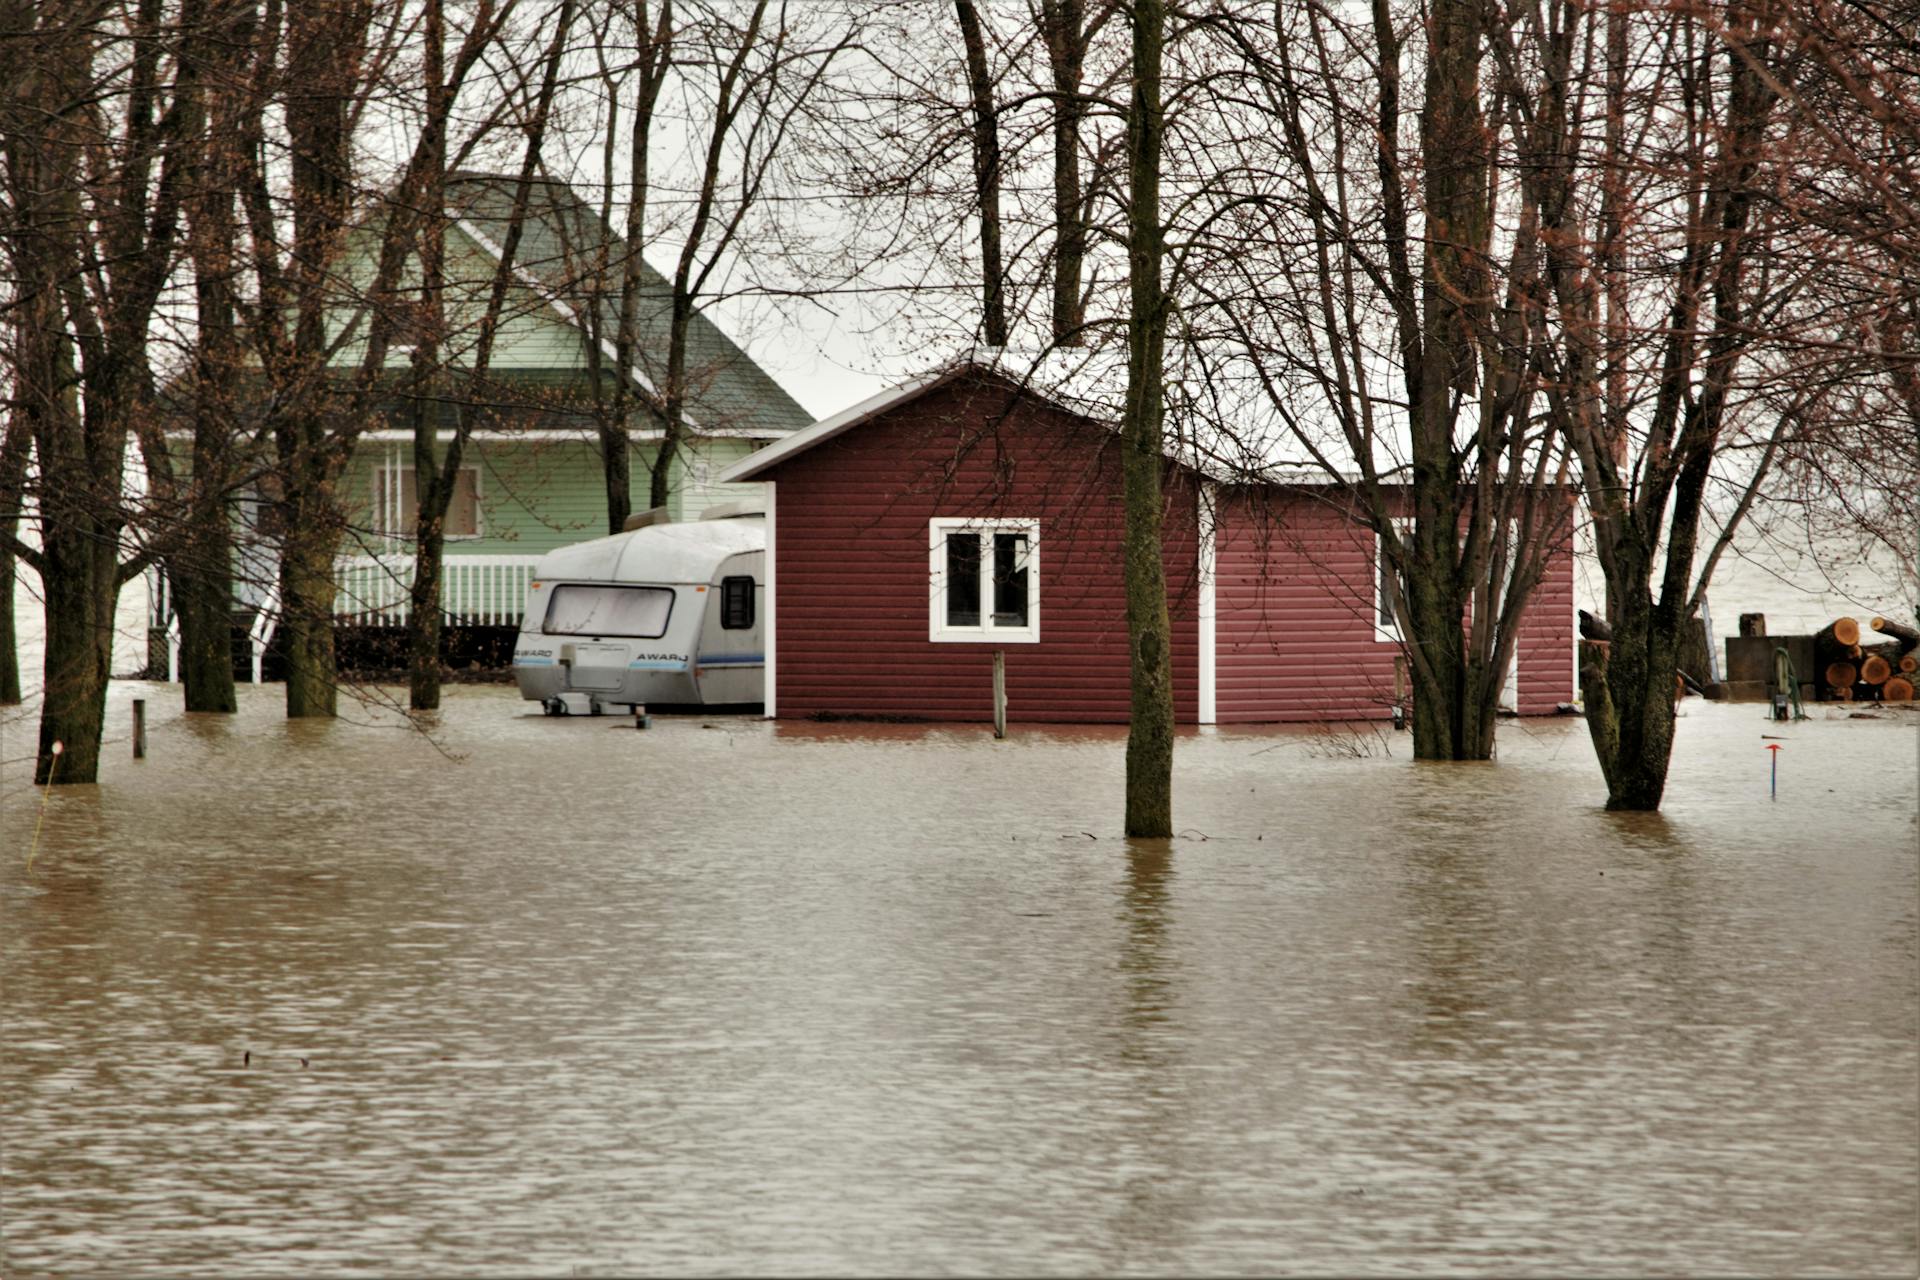 A large red shed, camping trailer, and modest home sit between leafless trees. The area is heavily flooded and water covers the ground entirely.